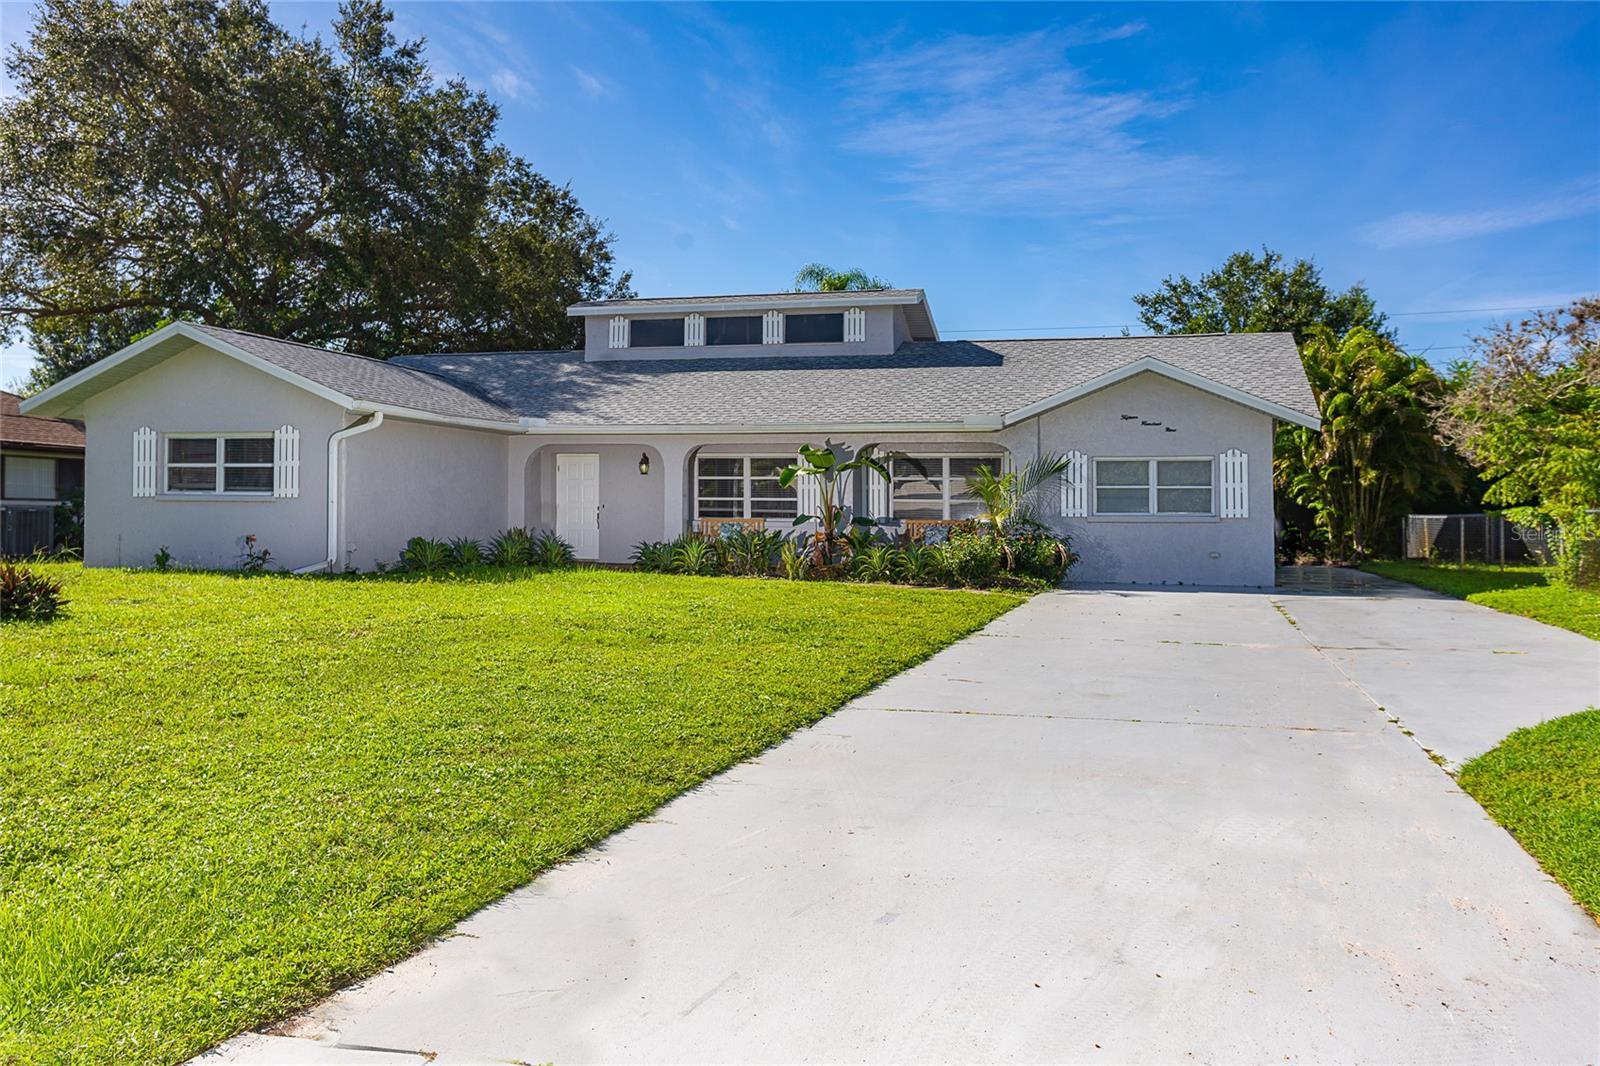 Photo one of 1509 Crest Dr Englewood FL 34223 | MLS G5081314